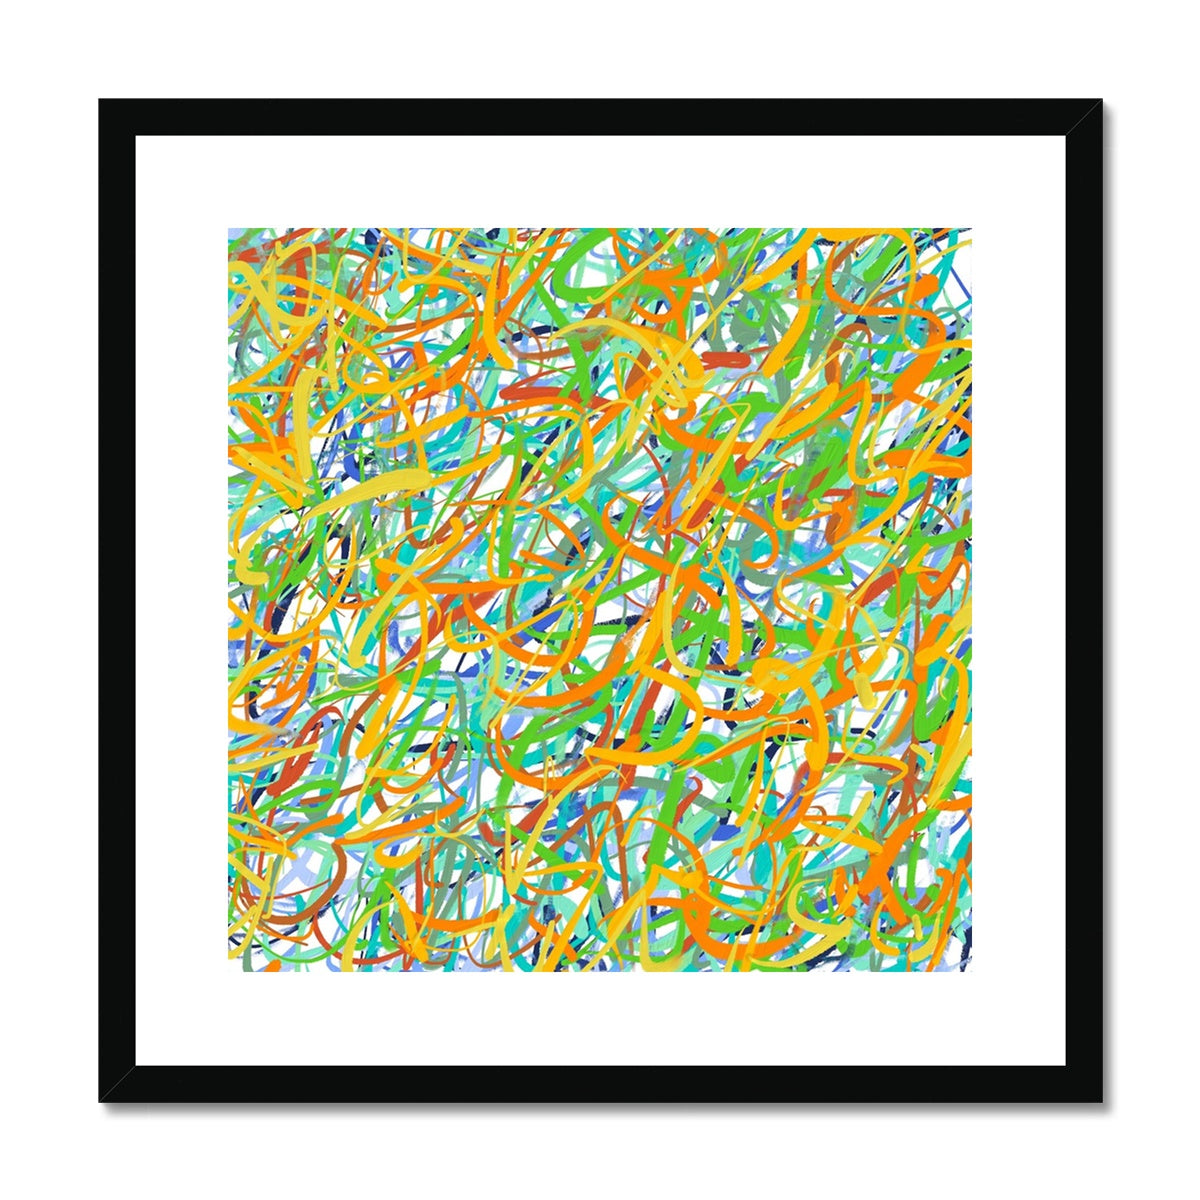 Bright yellows, reds and green tangle together with sky-blue, sea-blues and greens with white mount in black frame.